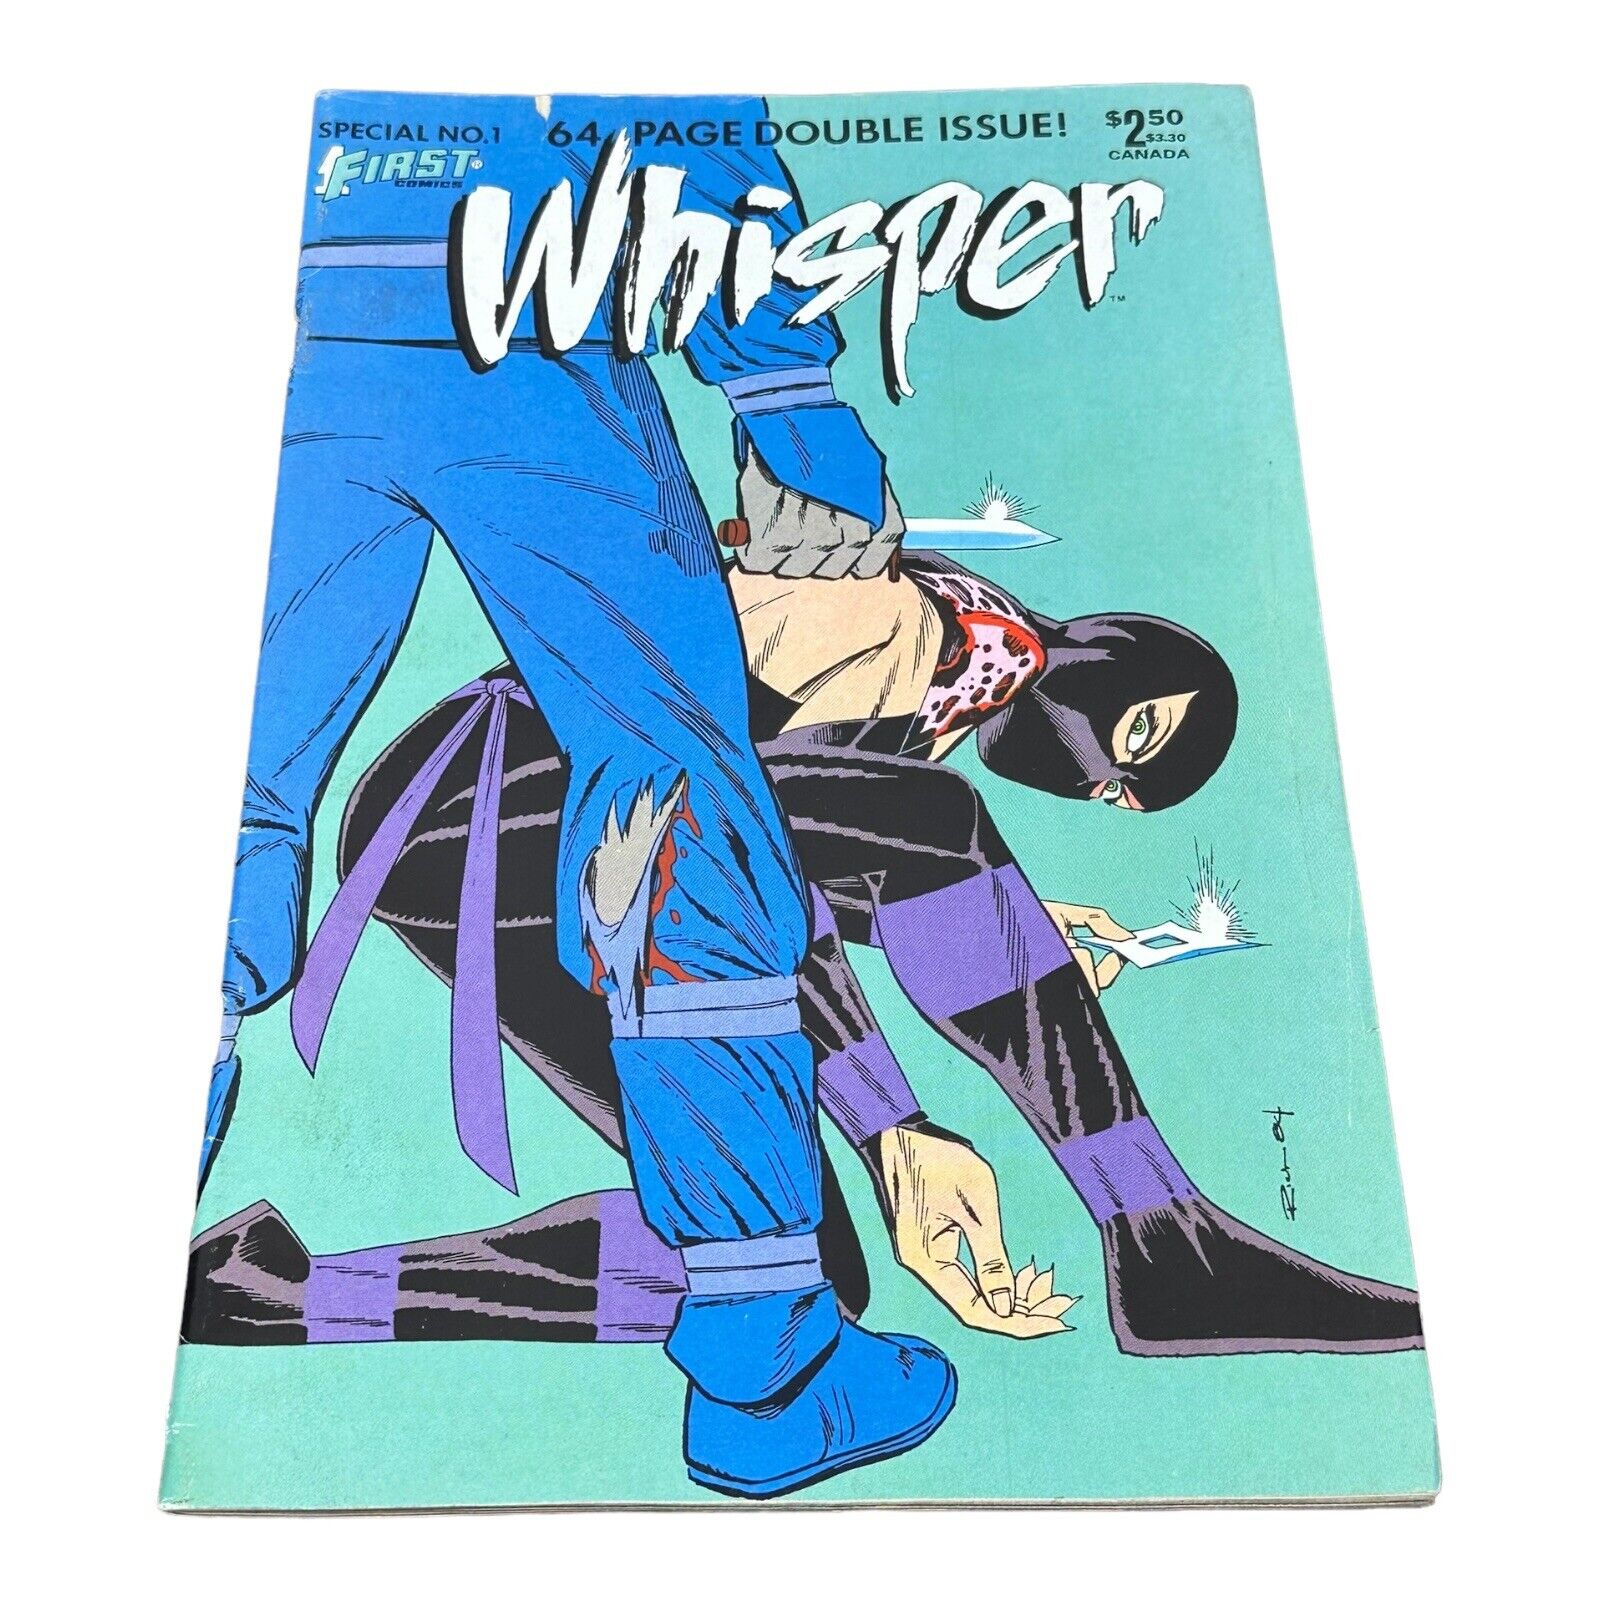 Whisper Special #1  1985 EXCELLENT 64 Page Double Issue FIRST COMICS